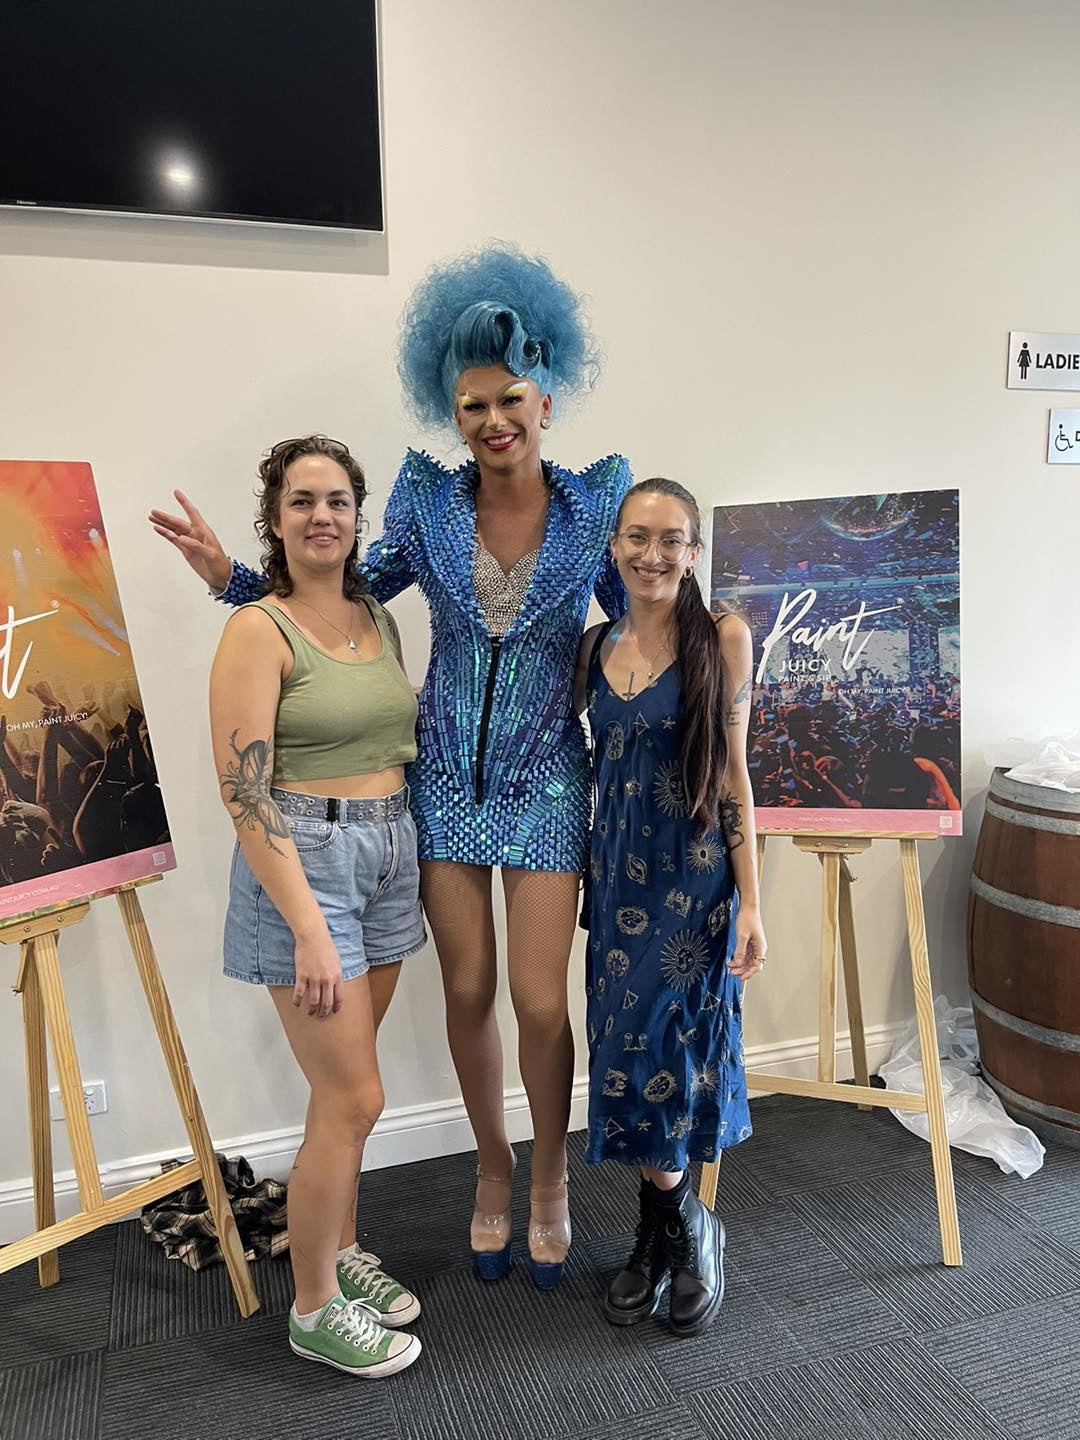 Paint and Sip at Airlie Beach and Paint Juicy-Paint Juicy - Paint and Sip